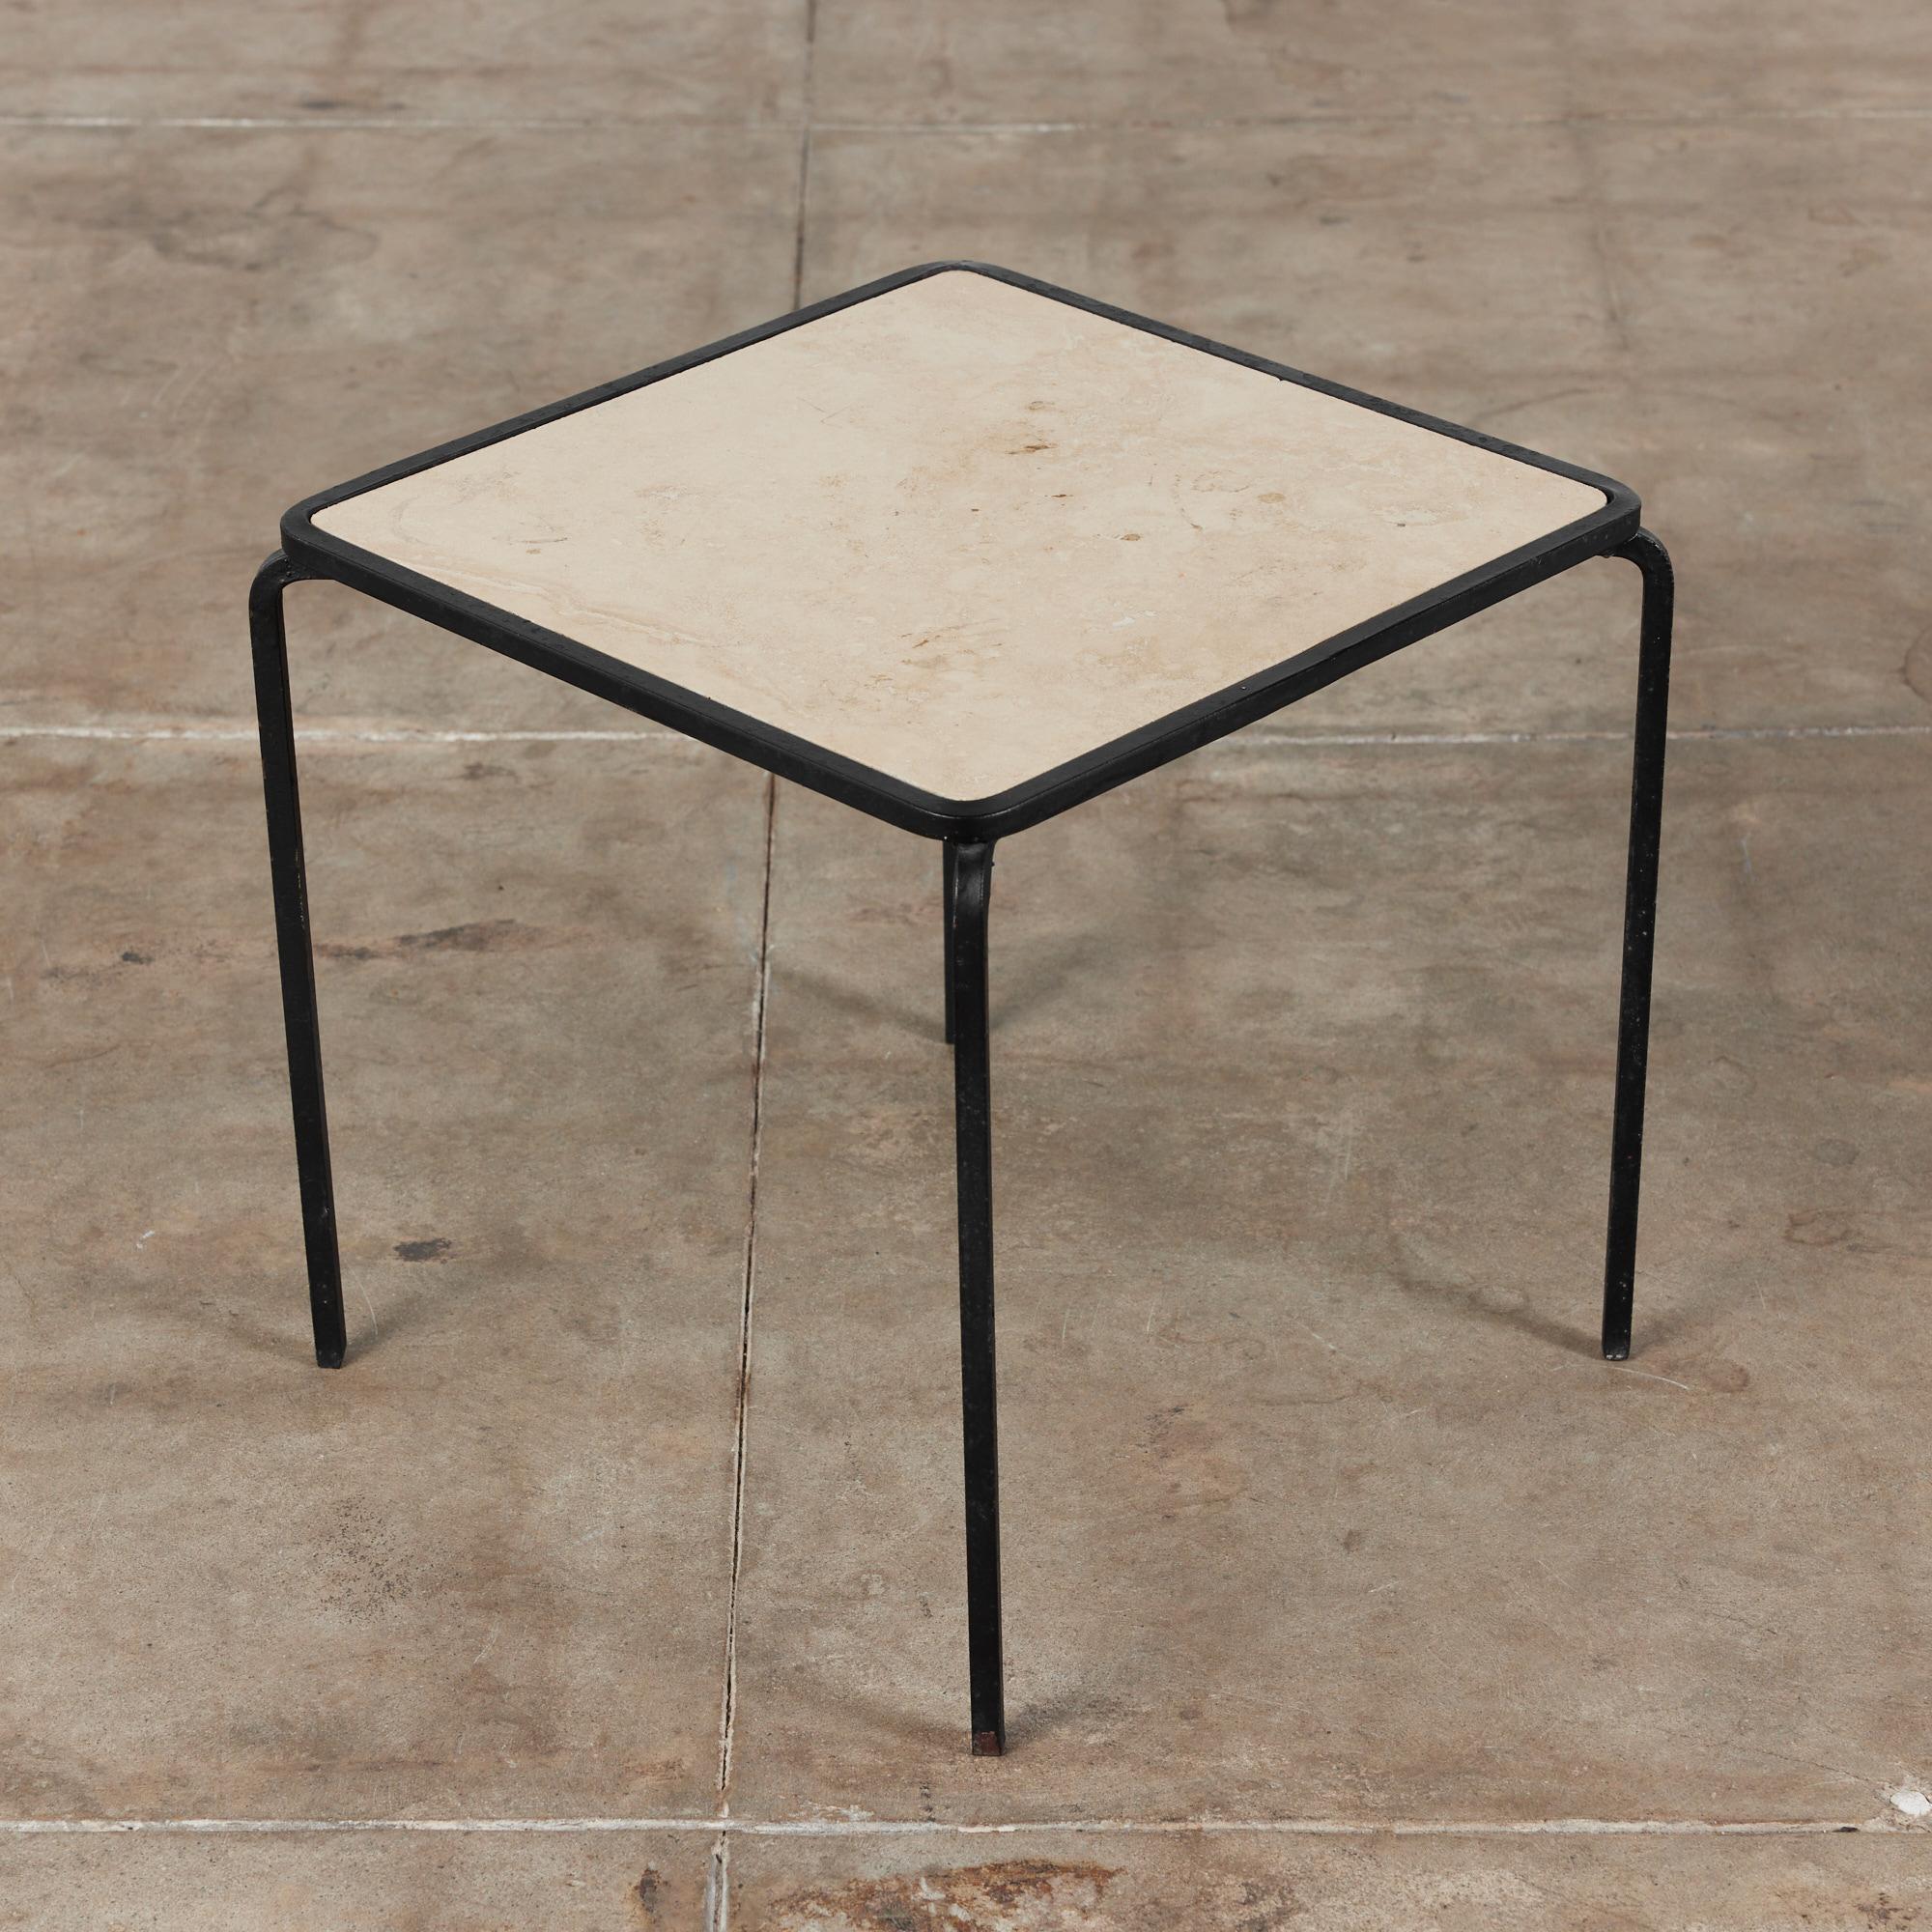 Wrought Iron Allan Gould Square Travertine Side Table for Reilly-Wolff